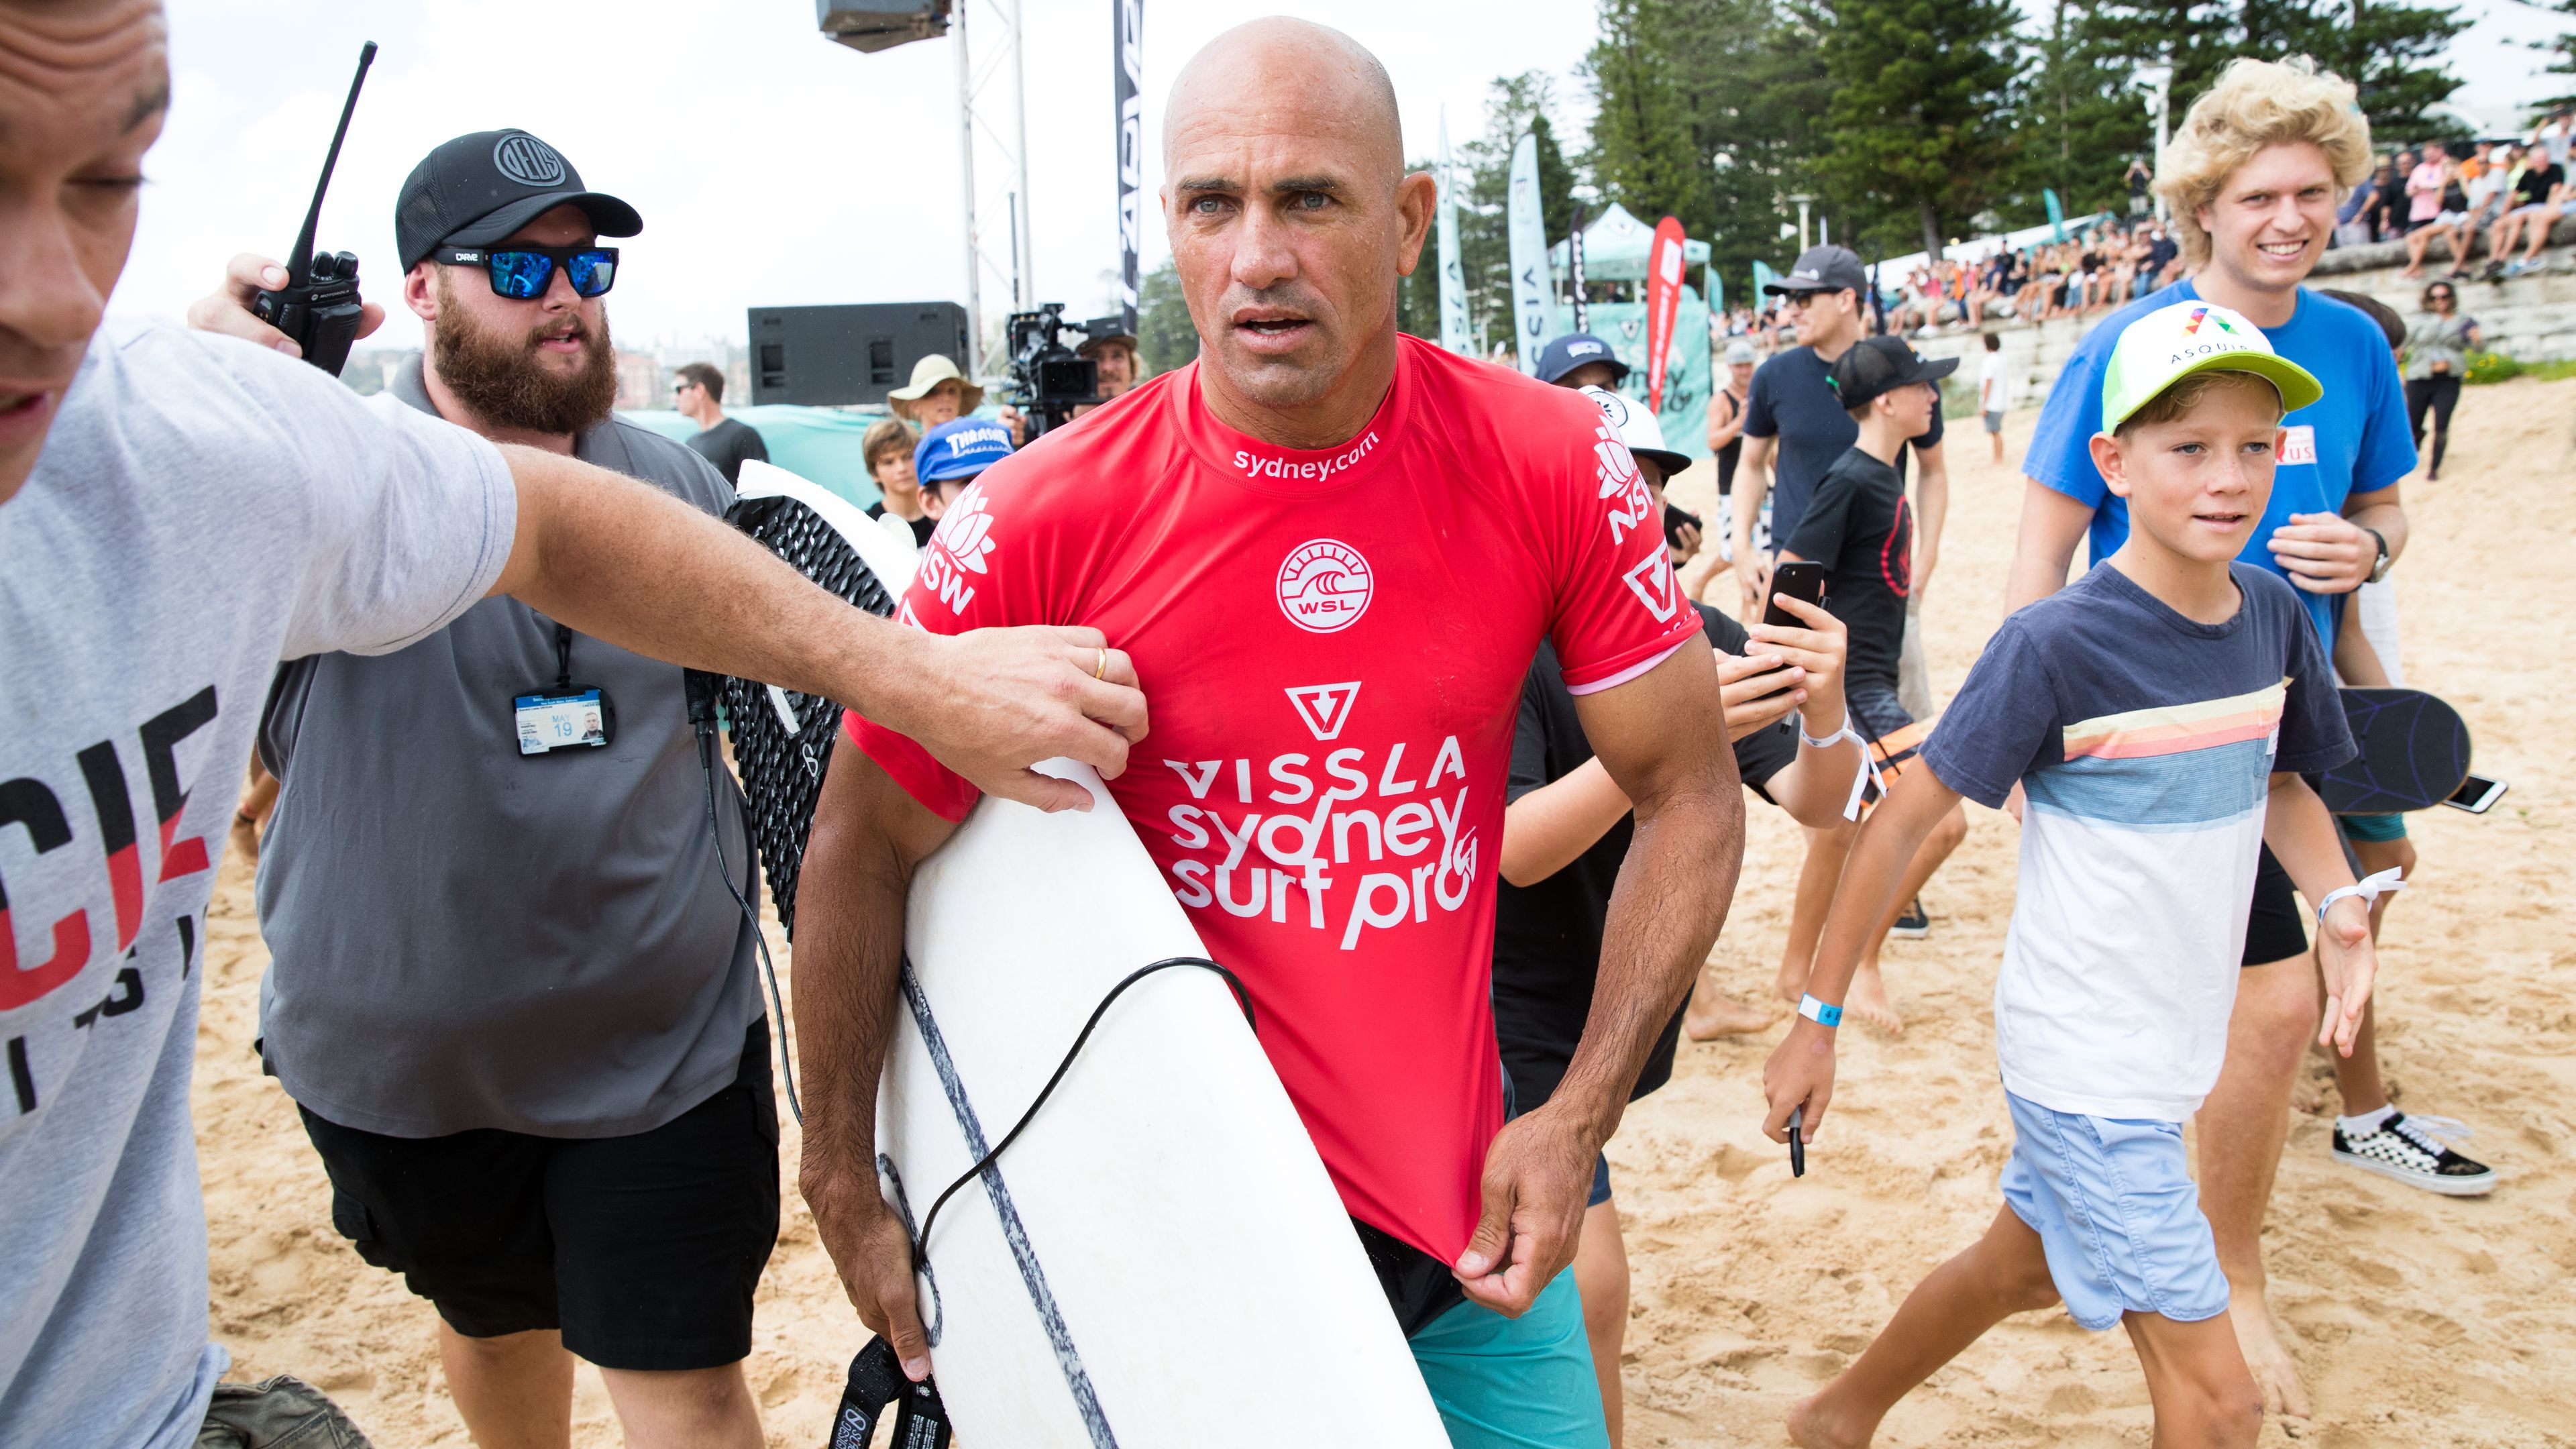 Kelly Slater emerges from the water after competing in the Vissla Sydney Surf Pro at Manly Beach, Sydney in 2019.